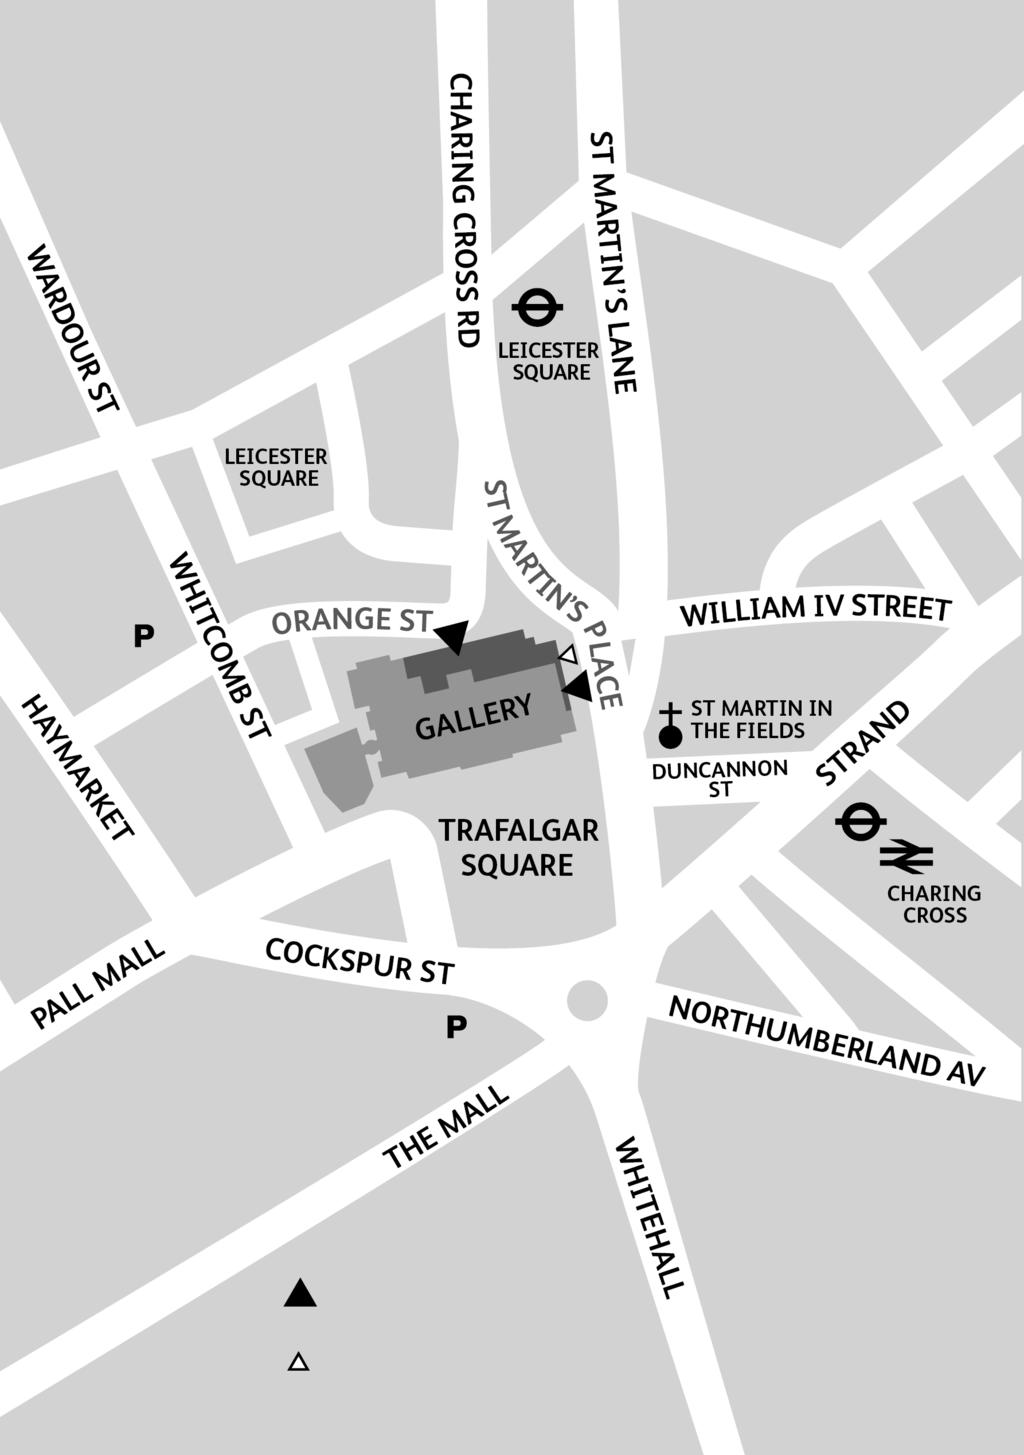 WARDOUR ST WHITCOMB ST LEICESTER SQUARE CHARING CROSS RD ORANGE ST HAYMARKET PALL MALL COCKSPUR ST THE MALL ST MARTIN S PLACE ST MARTIN S LANE LEICESTER SQUARE Website The Gallery s website has